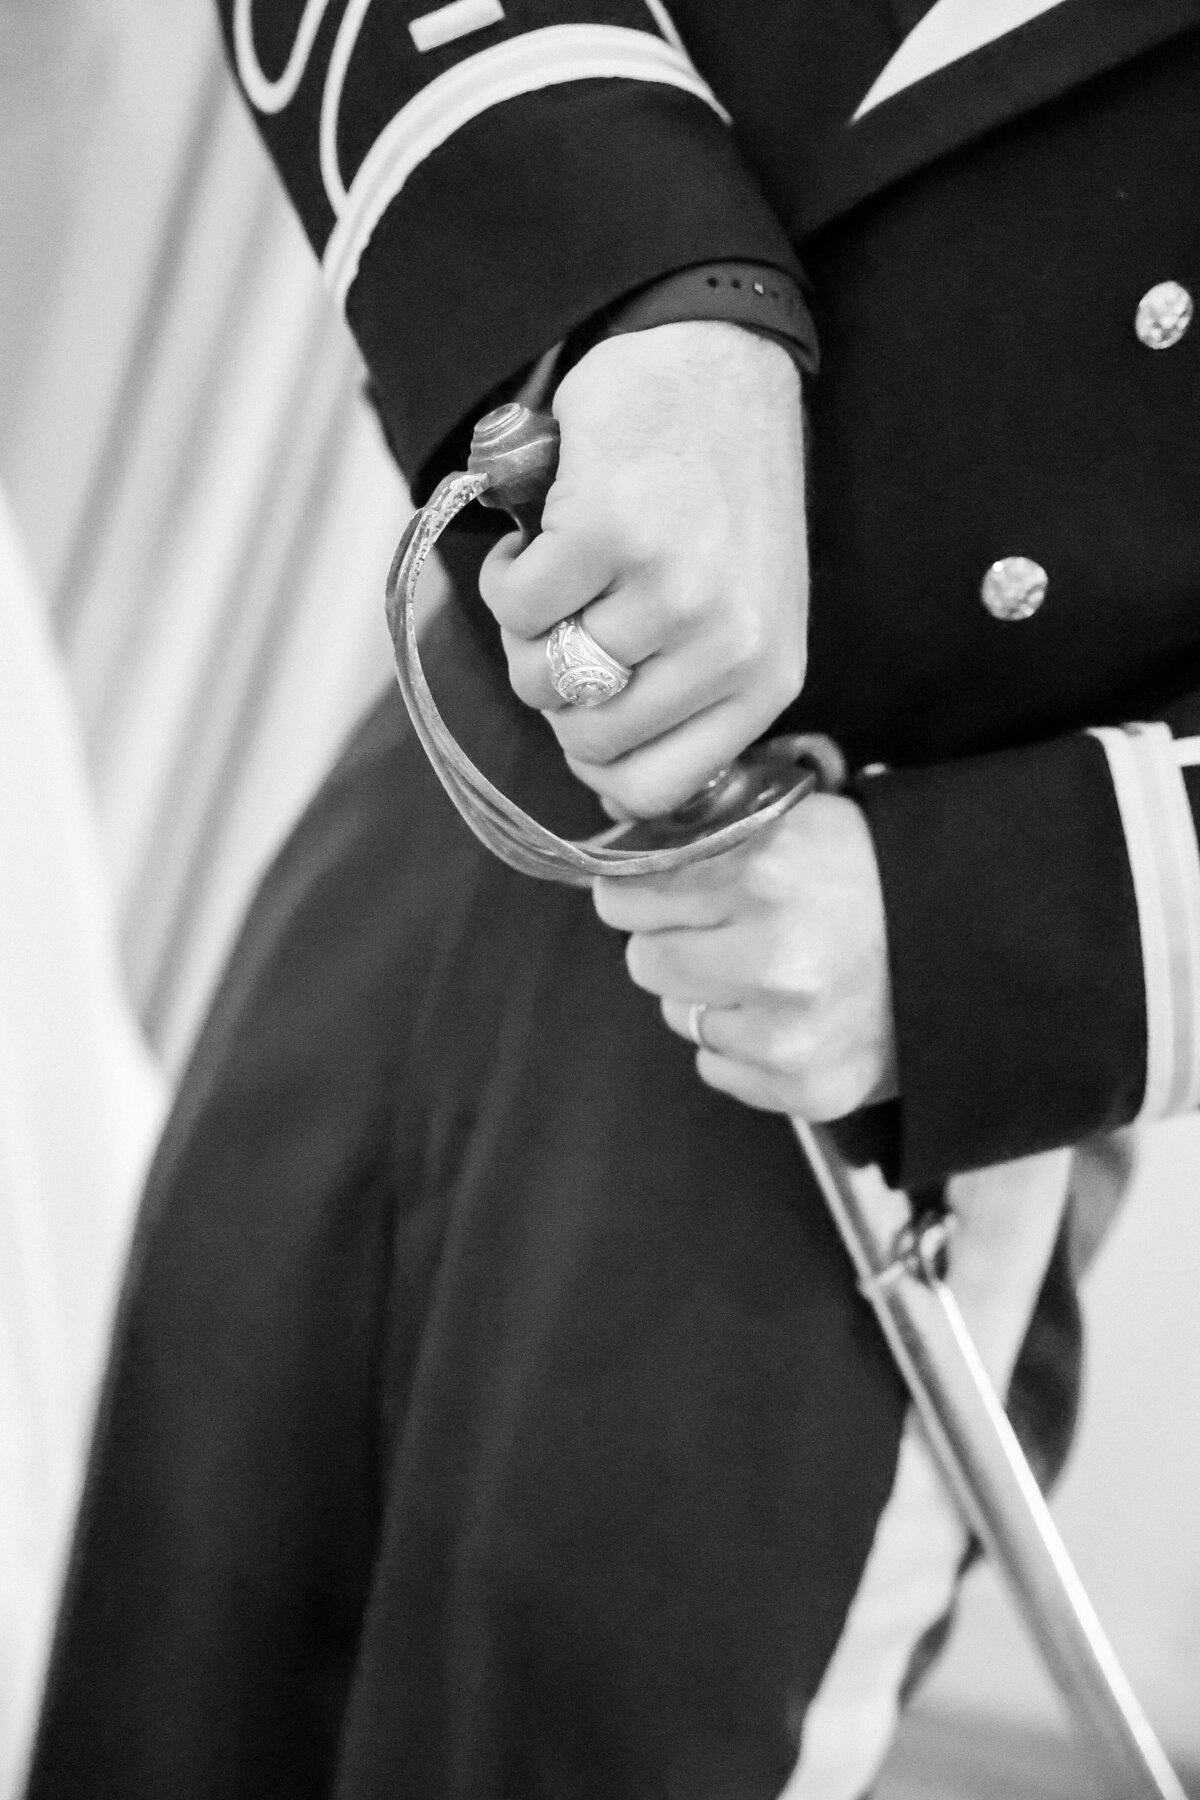 black and white aggie wedding groom holds saber in military uniform at wedding near austin texas